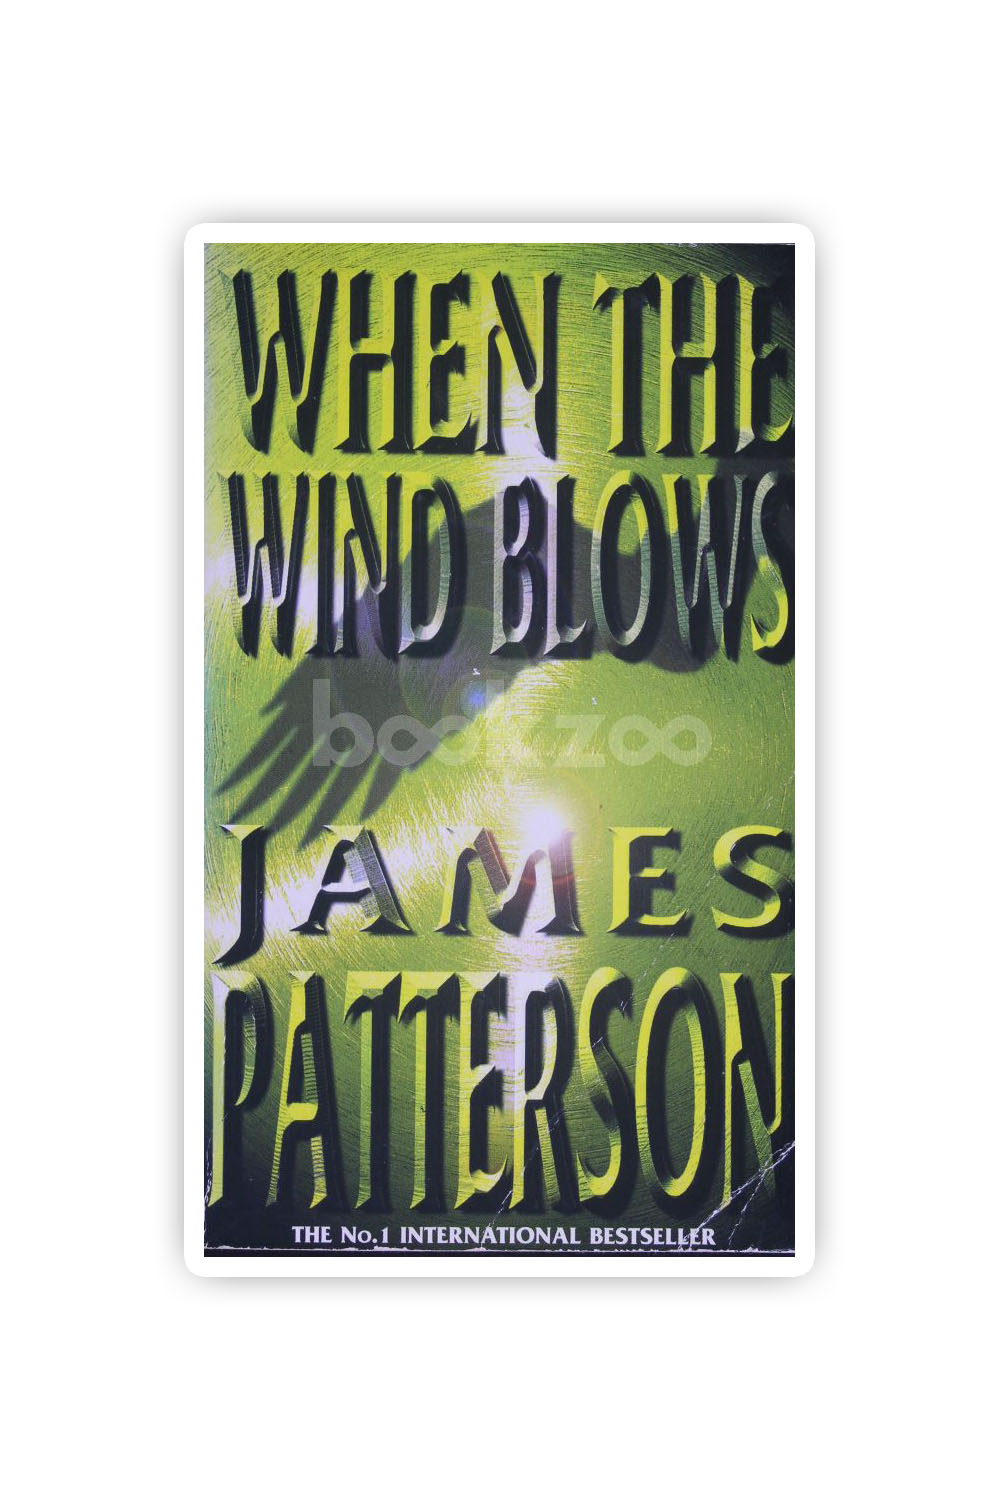 Buy When the Wind Blows by James Patterson at Online bookstore bookzoo.in